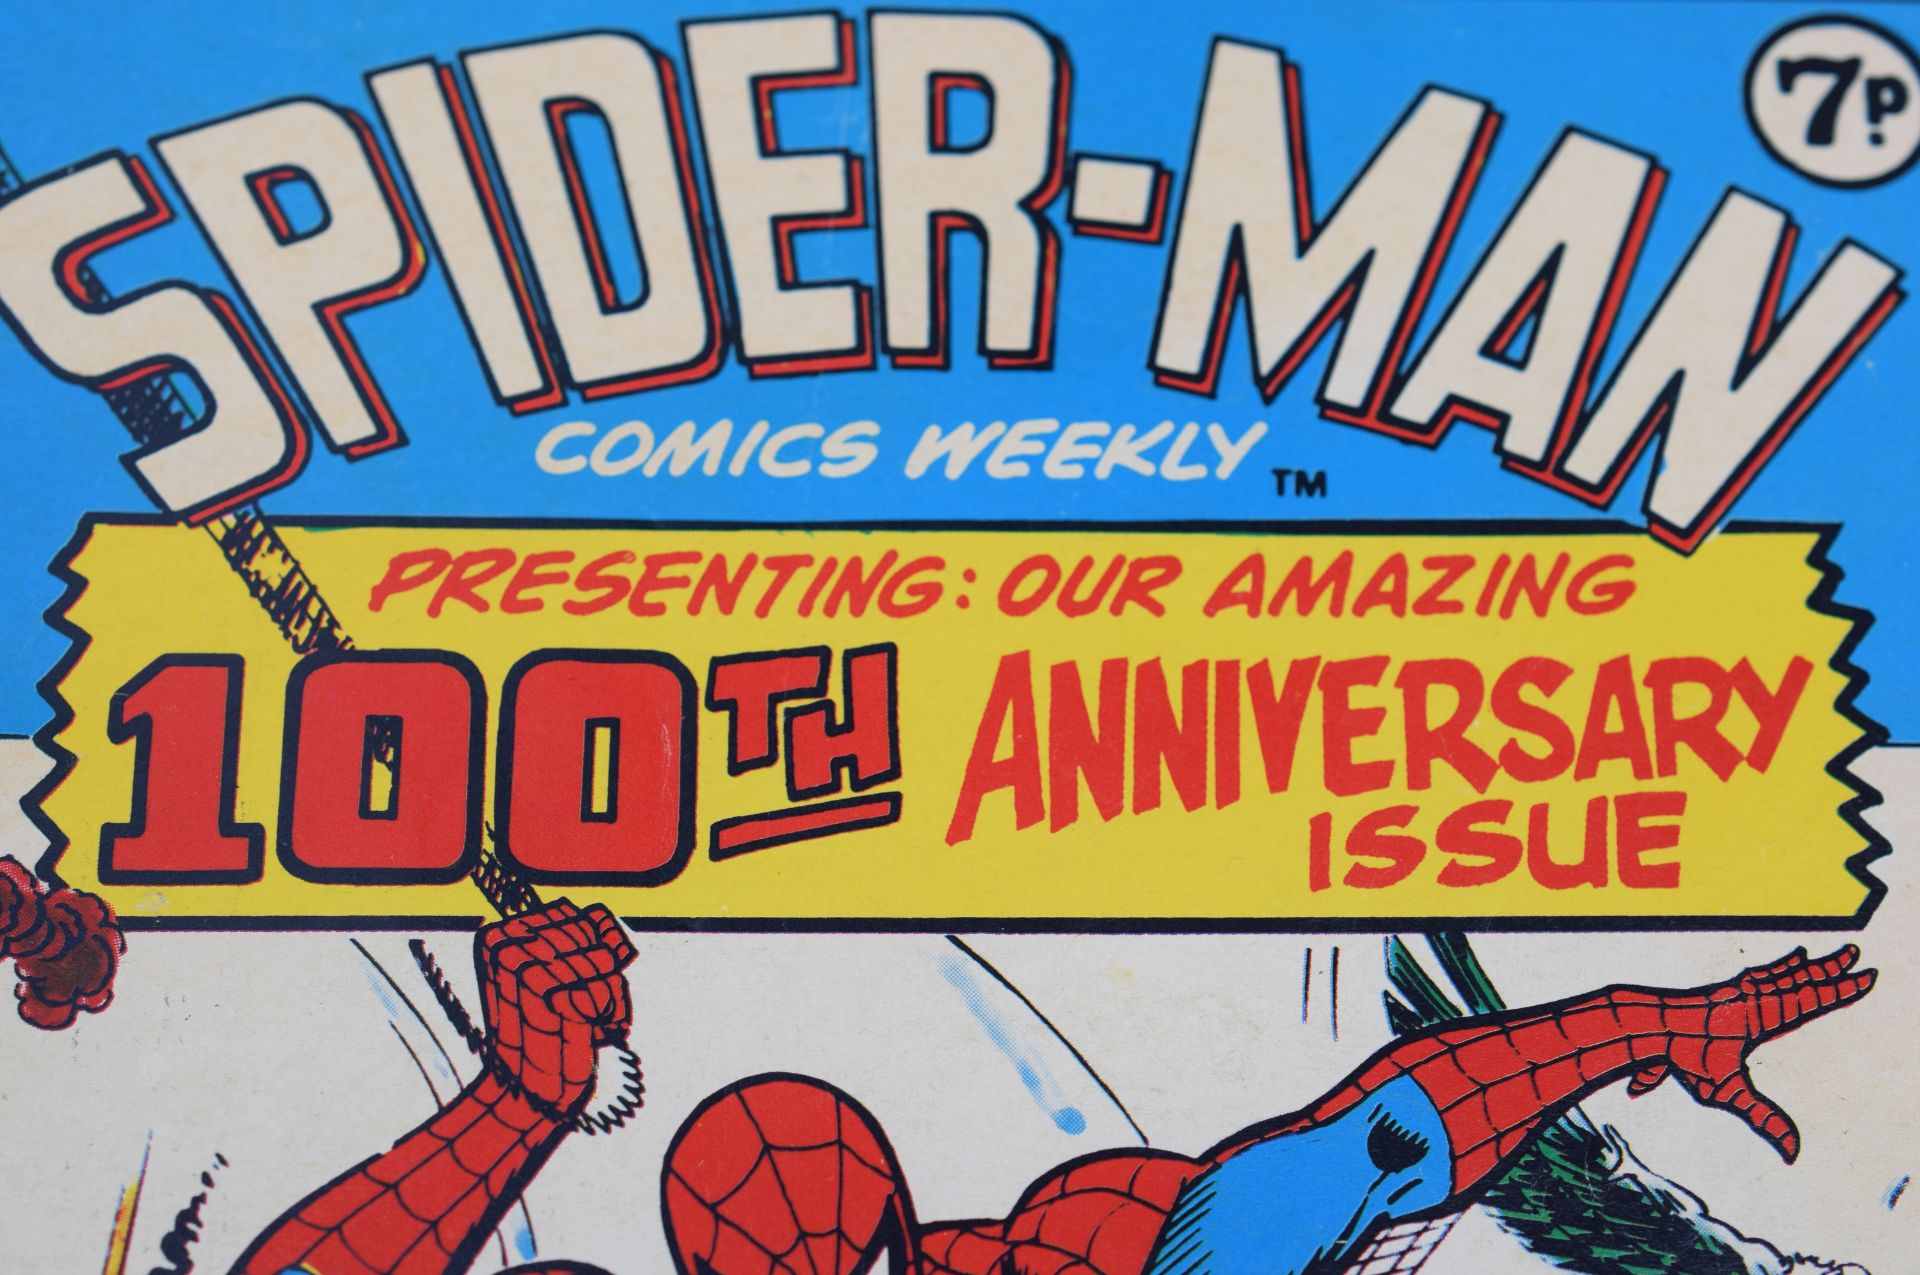 Spiderman Comic 100th Anniversary Issue 100 1975 - Image 2 of 4